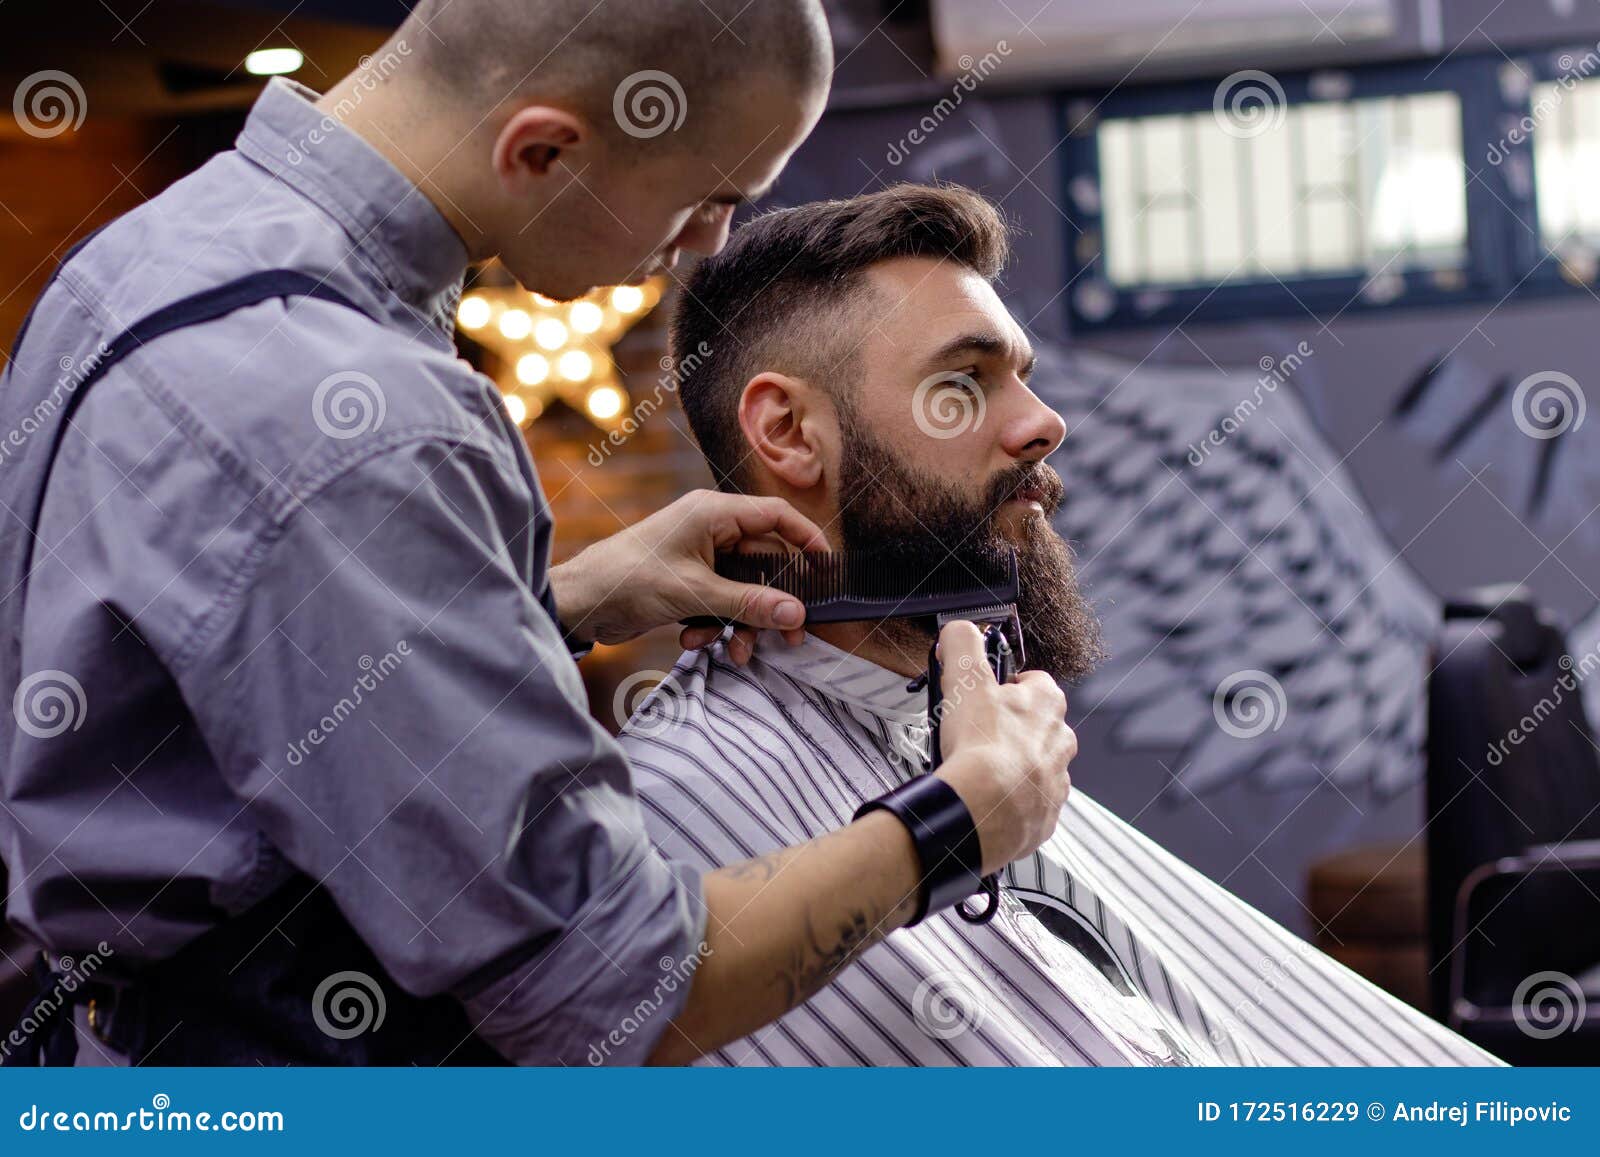 Young Bearded Man Getting Shaved in Barber Shop. Stock Image - Image of ...